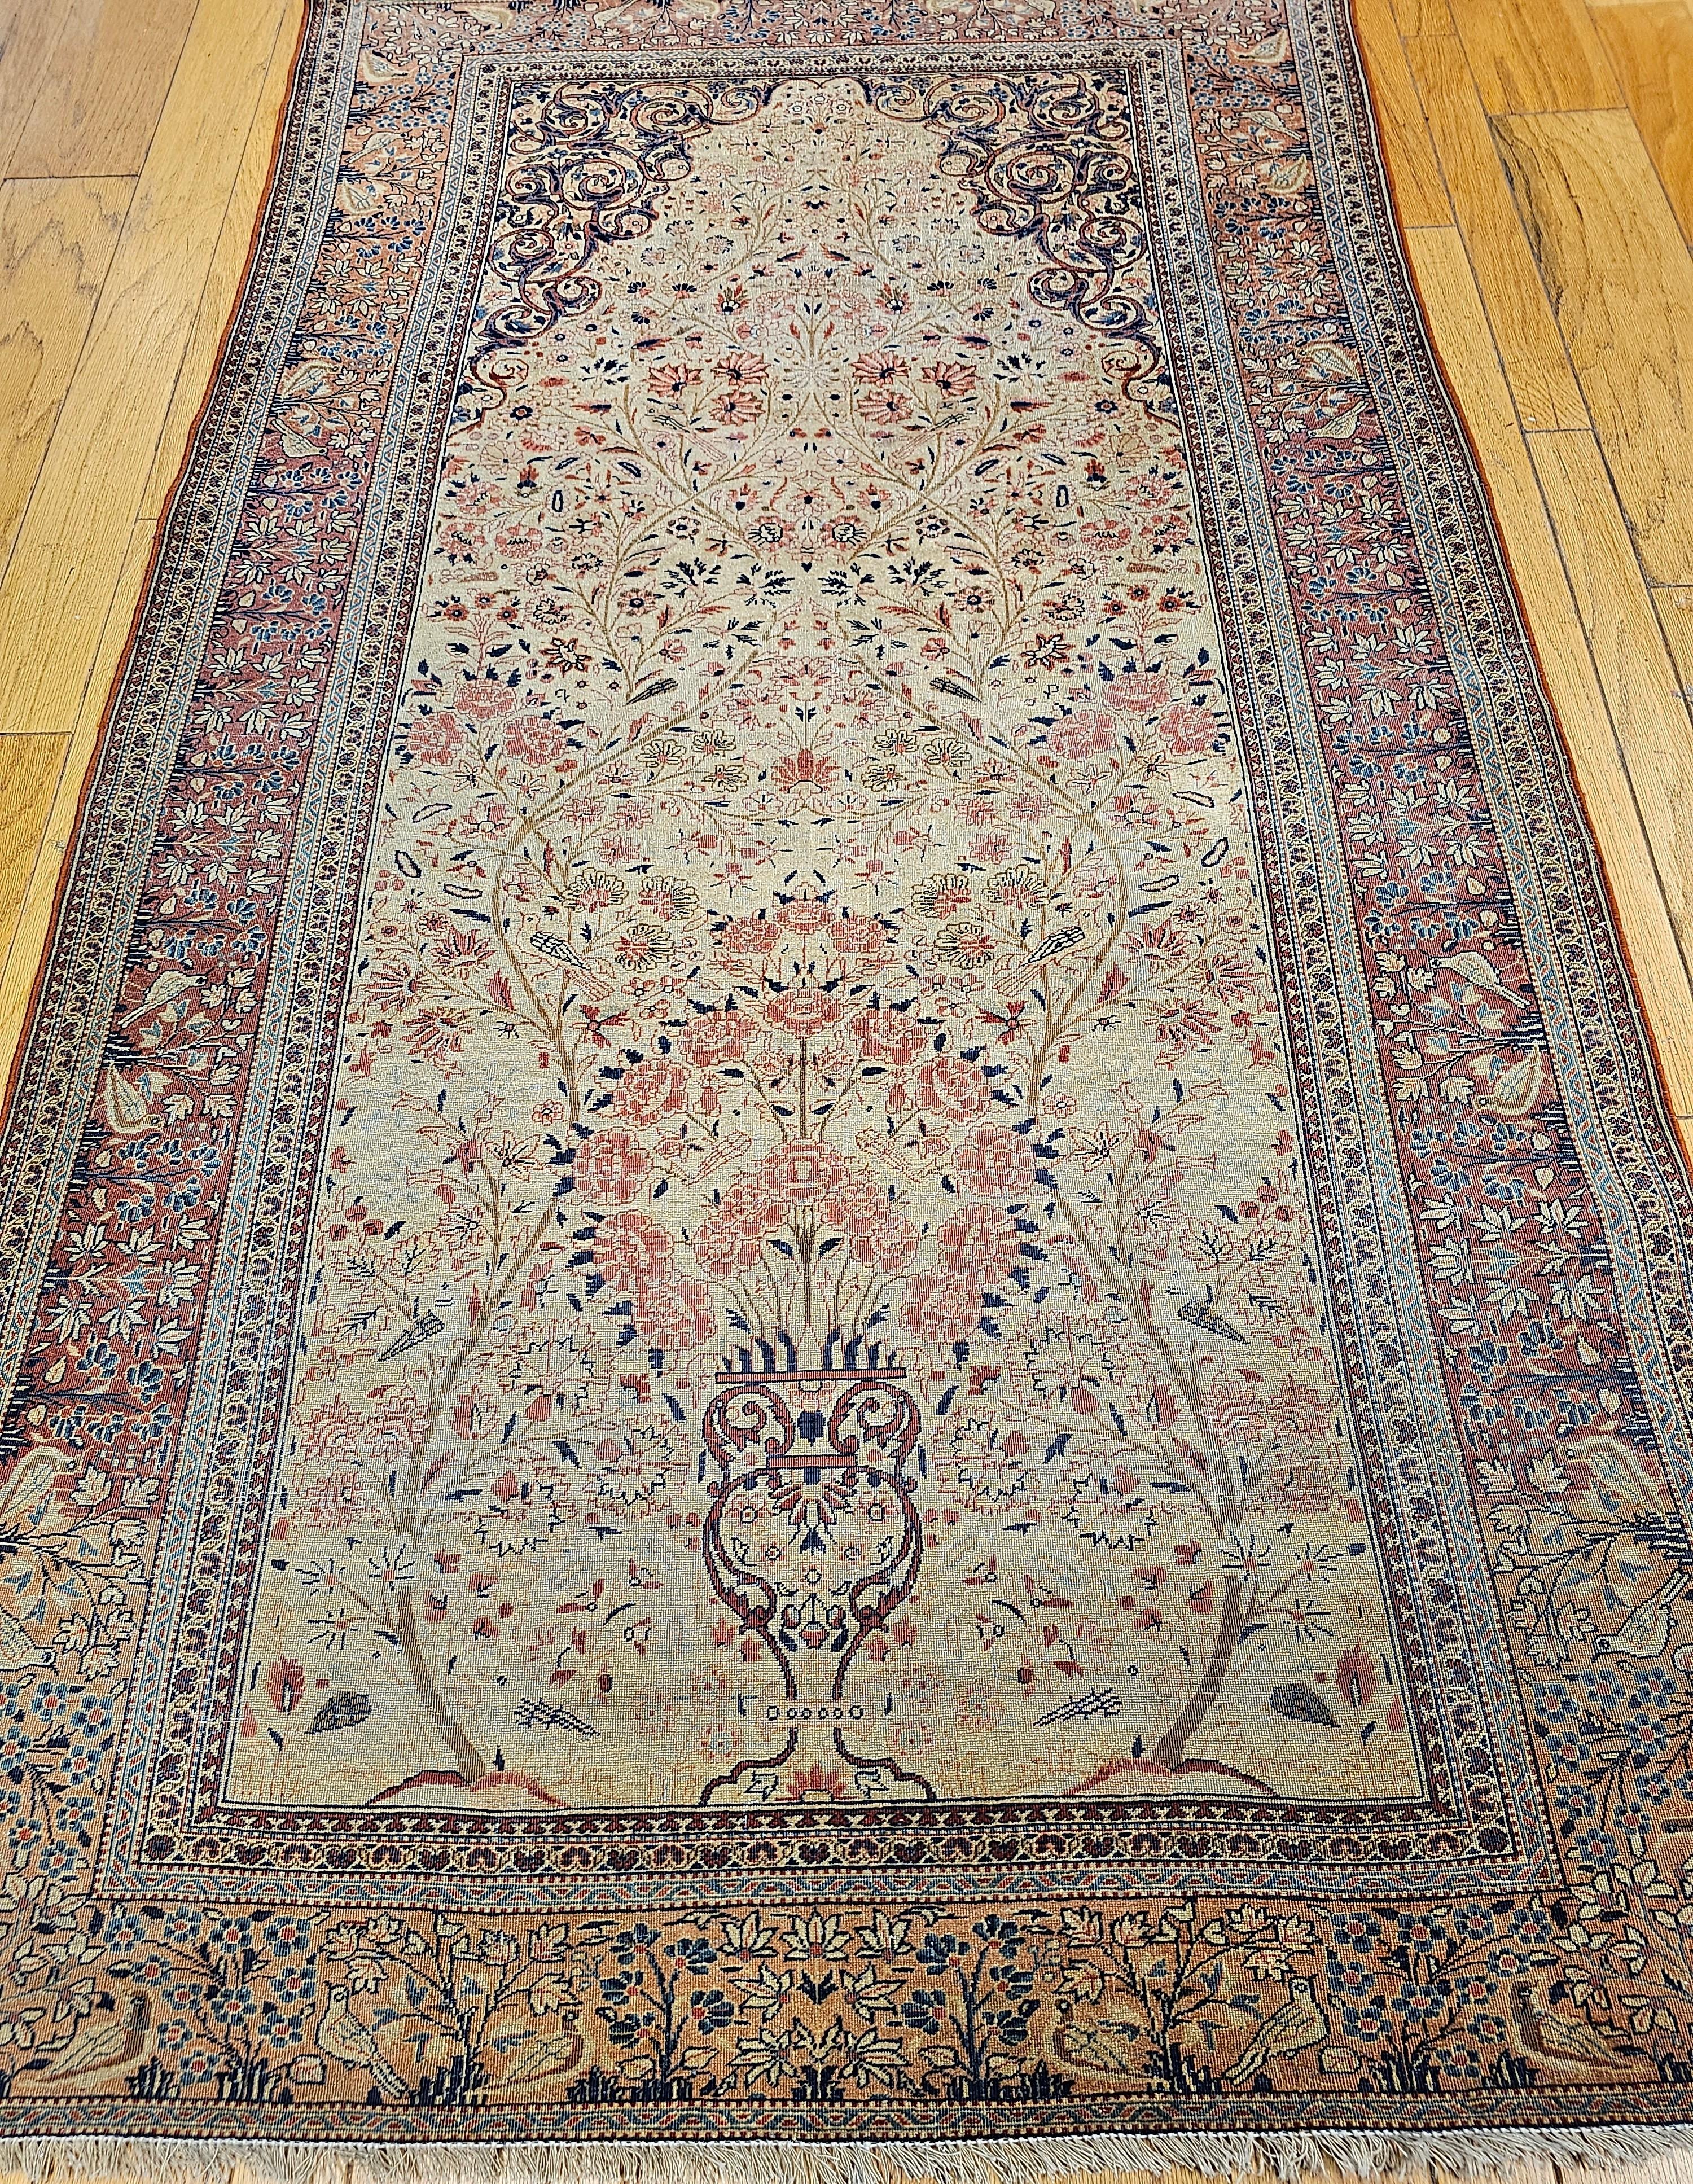 19th Century Persian Kashan Vase “Tree of Life” Rug in Ivory, Brick Red, Navy For Sale 14